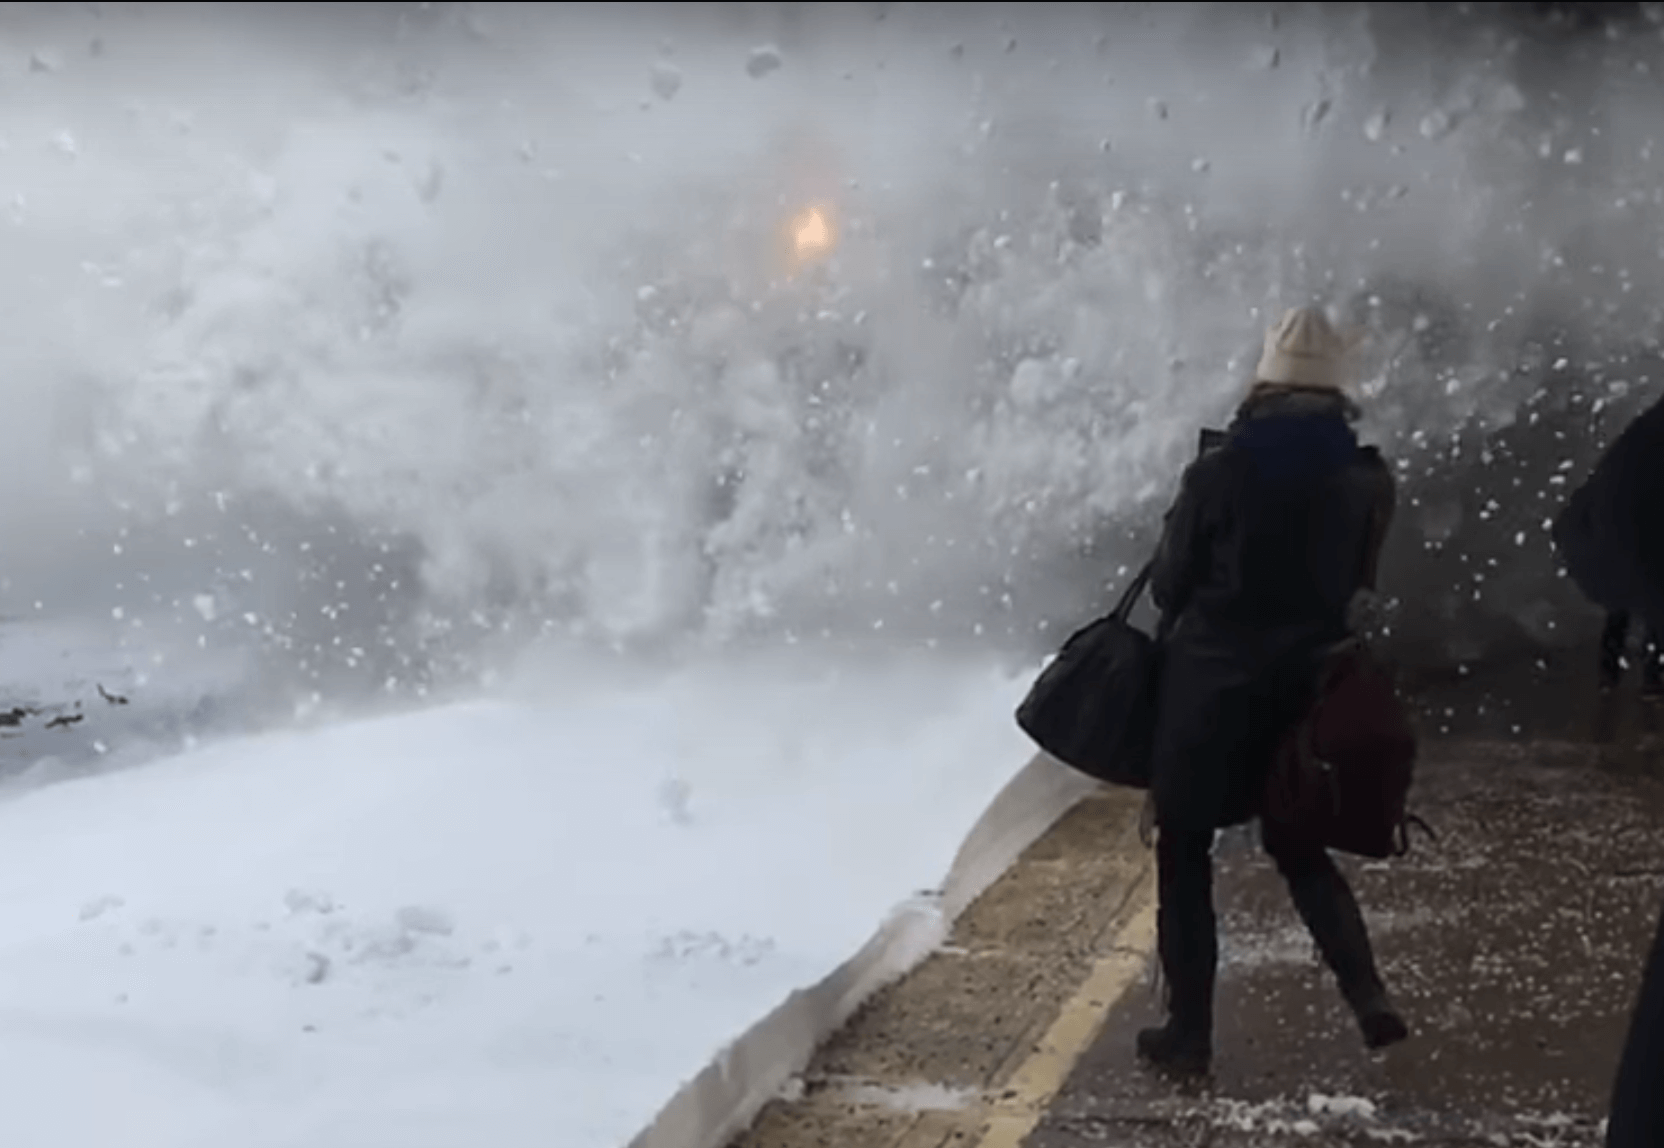 Amtrack train blasts commuters with snow